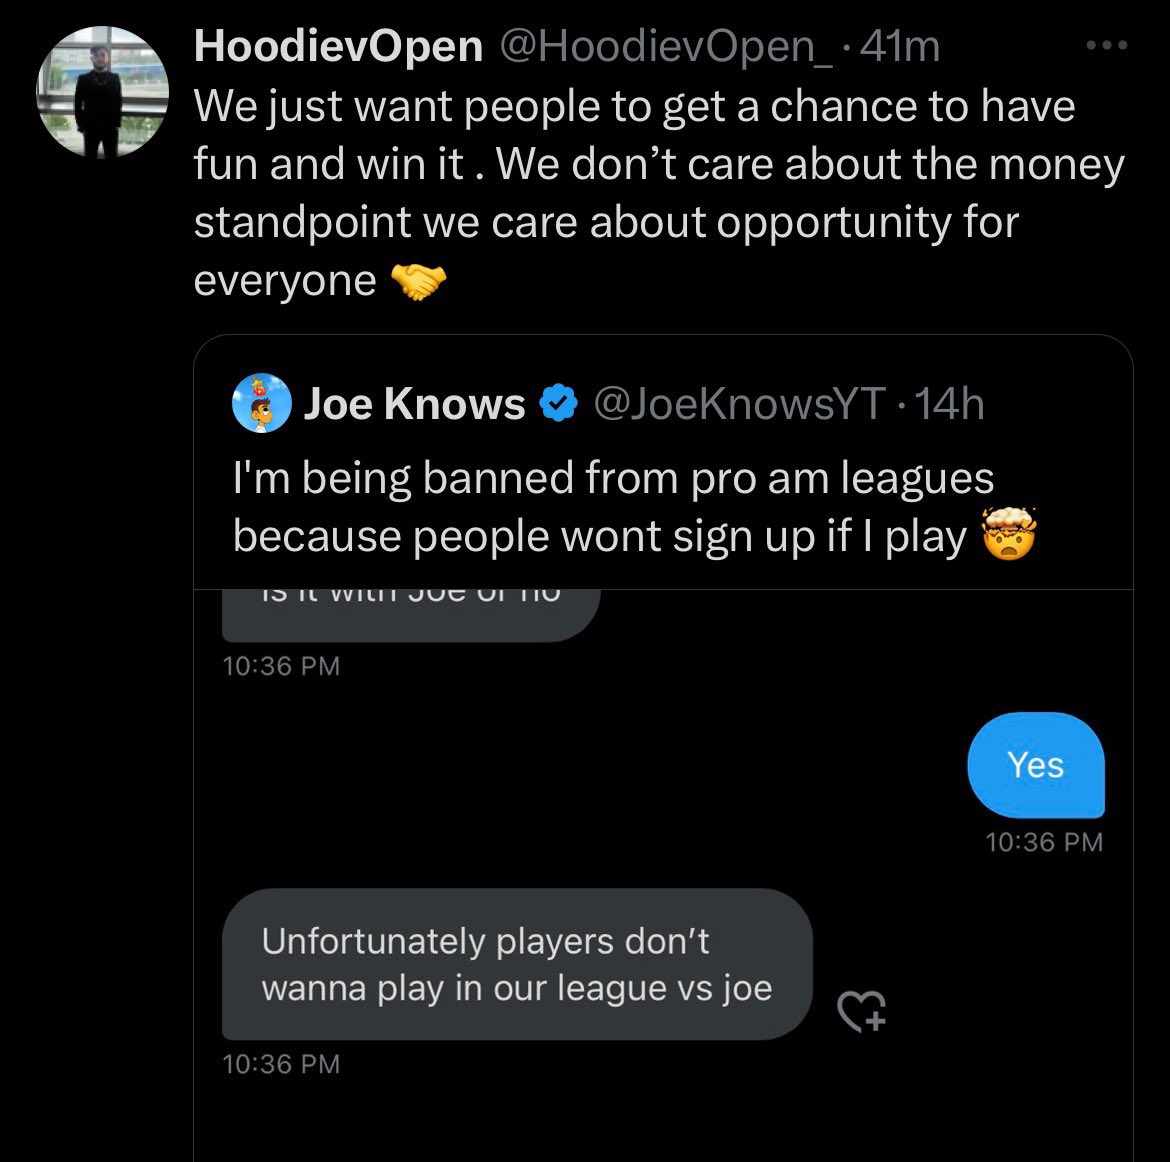 Banning Joe Knows from pro am tourneys because he is too good is CRAZY People should want to play against the best of the best, not run away from them, that’s how you improve and get better Only in the 2k community, never seen this in any other gaming community 😂